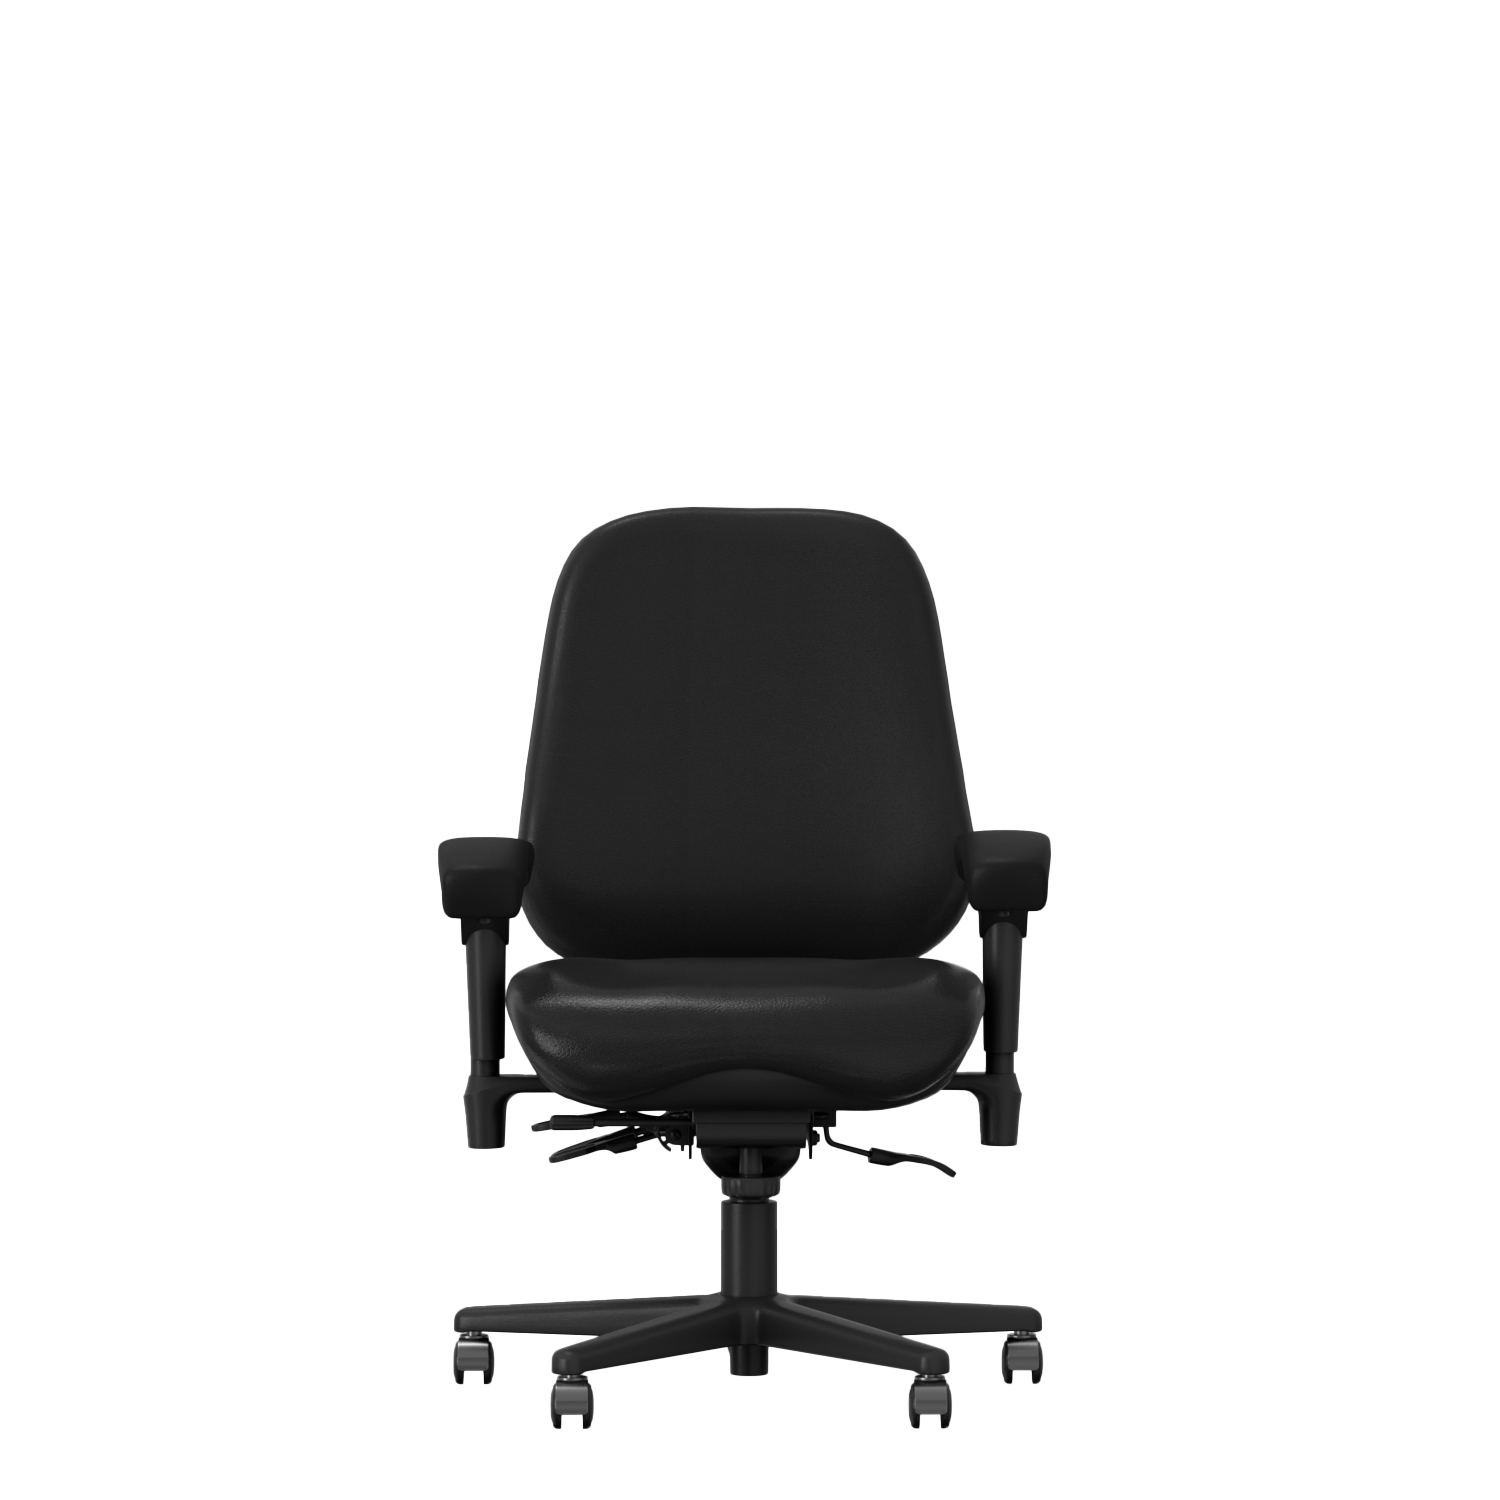 NEXT24 2500 – Intensive Use Series Chair